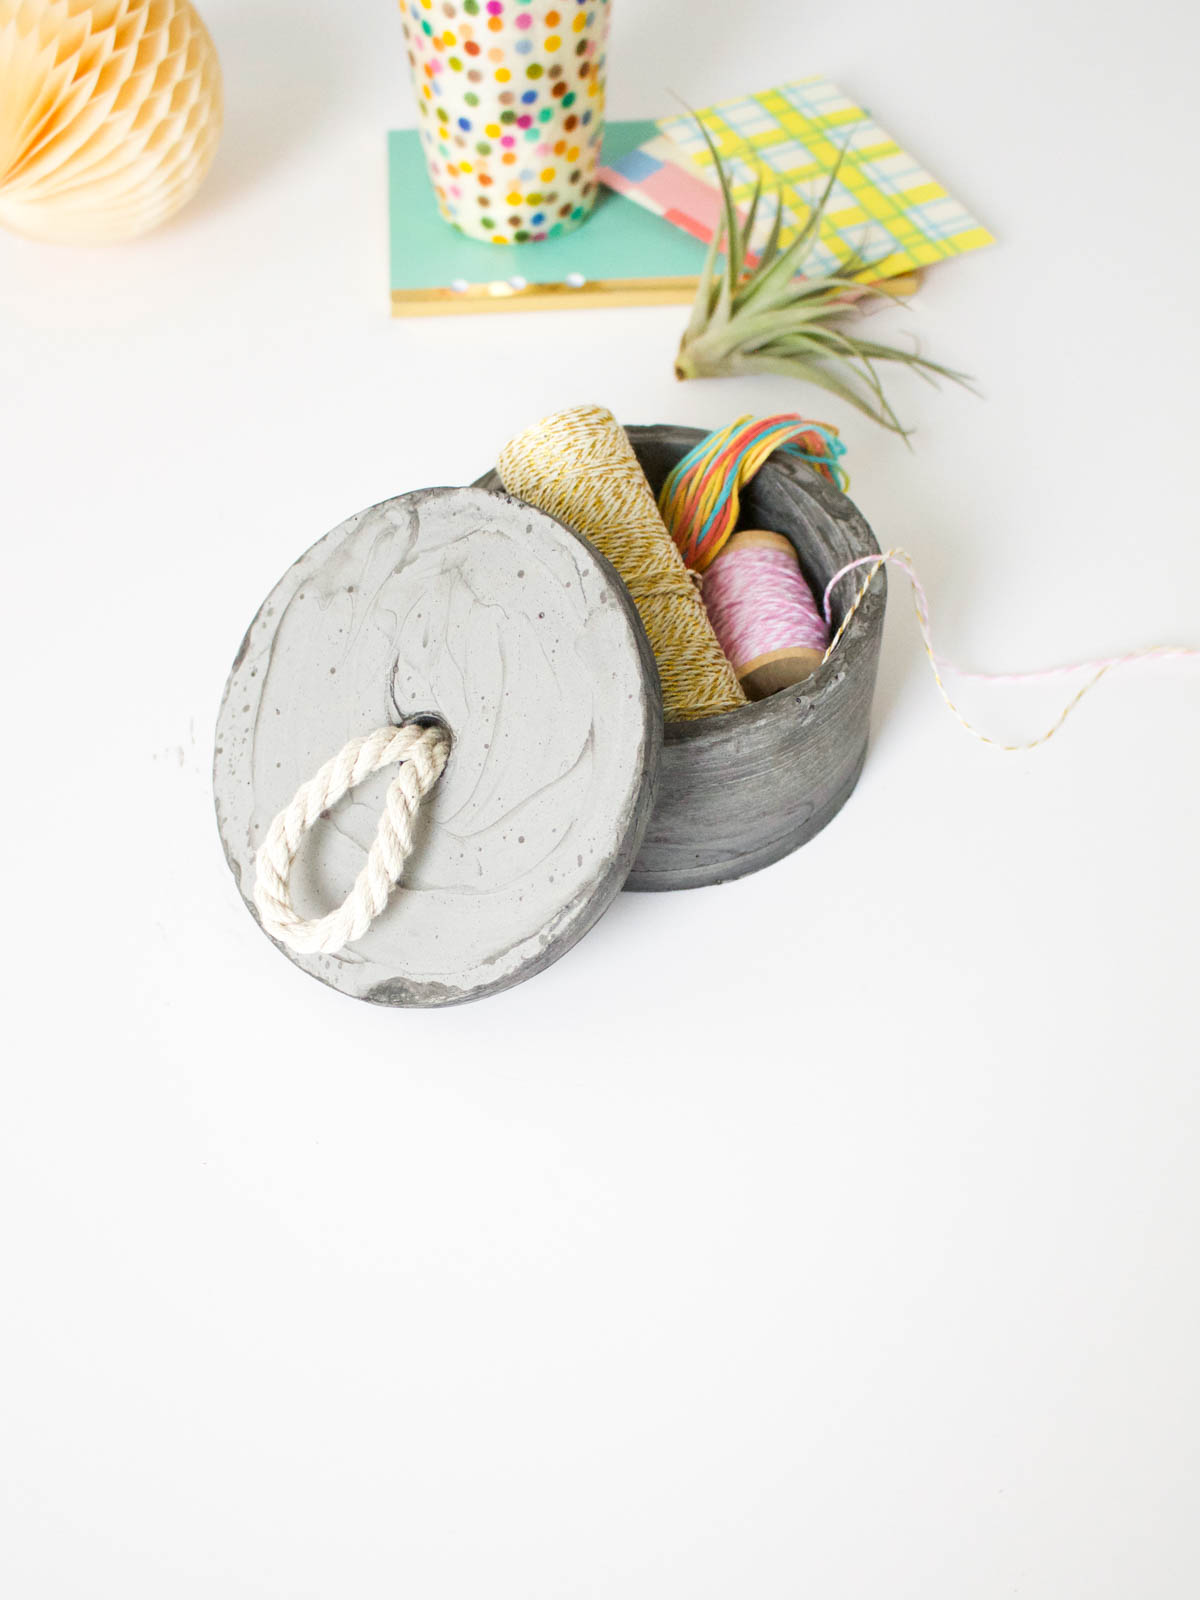 DIY Concrete Bowl and Lid | Fish & Bull - If you too are in need of some modern small storage for your office supplies, keys or jewelry this DIY was made for you!